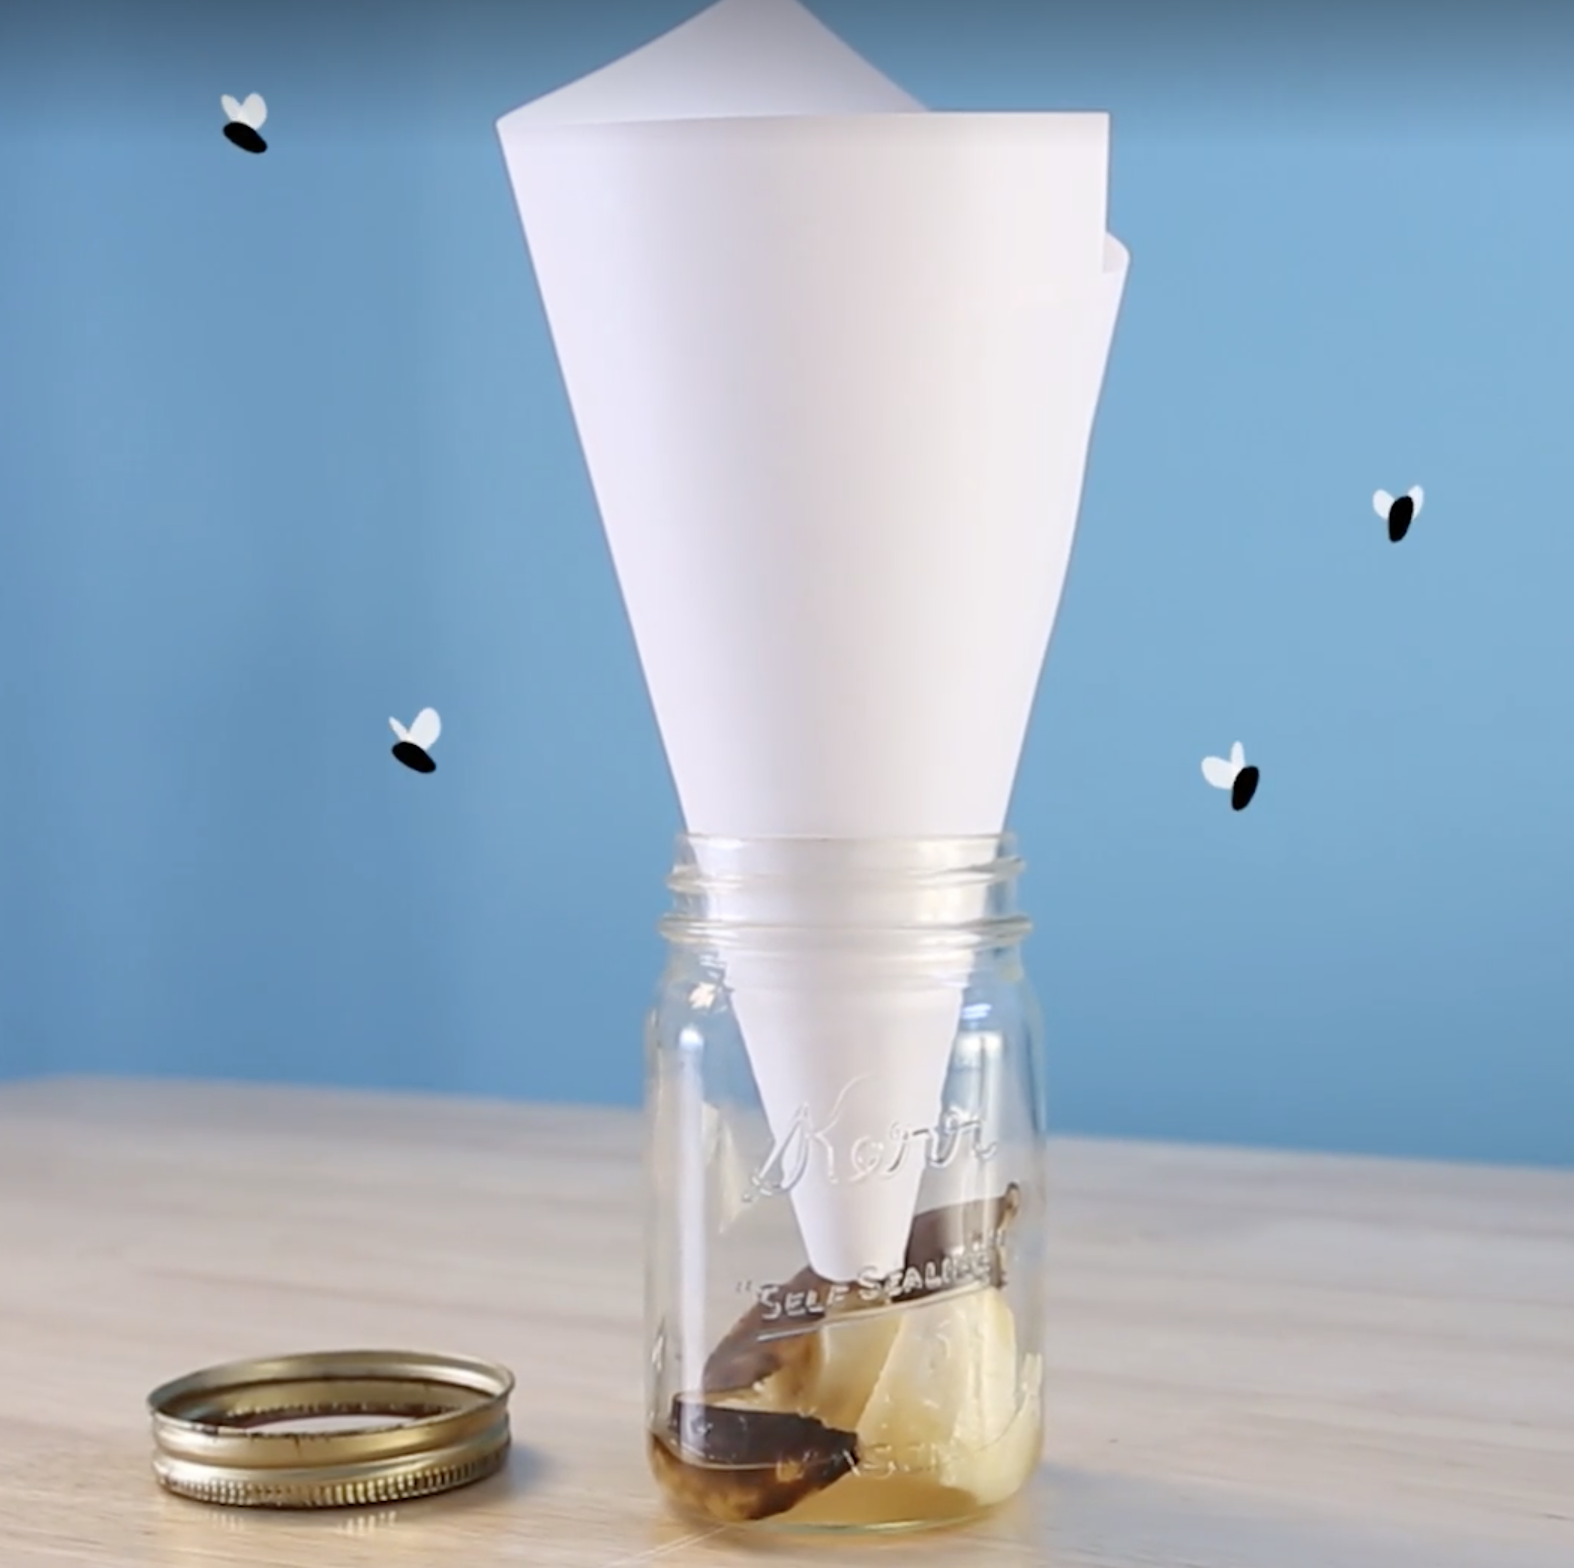 This Is THE Most Effective Way to Get Rid of Flies This Summer